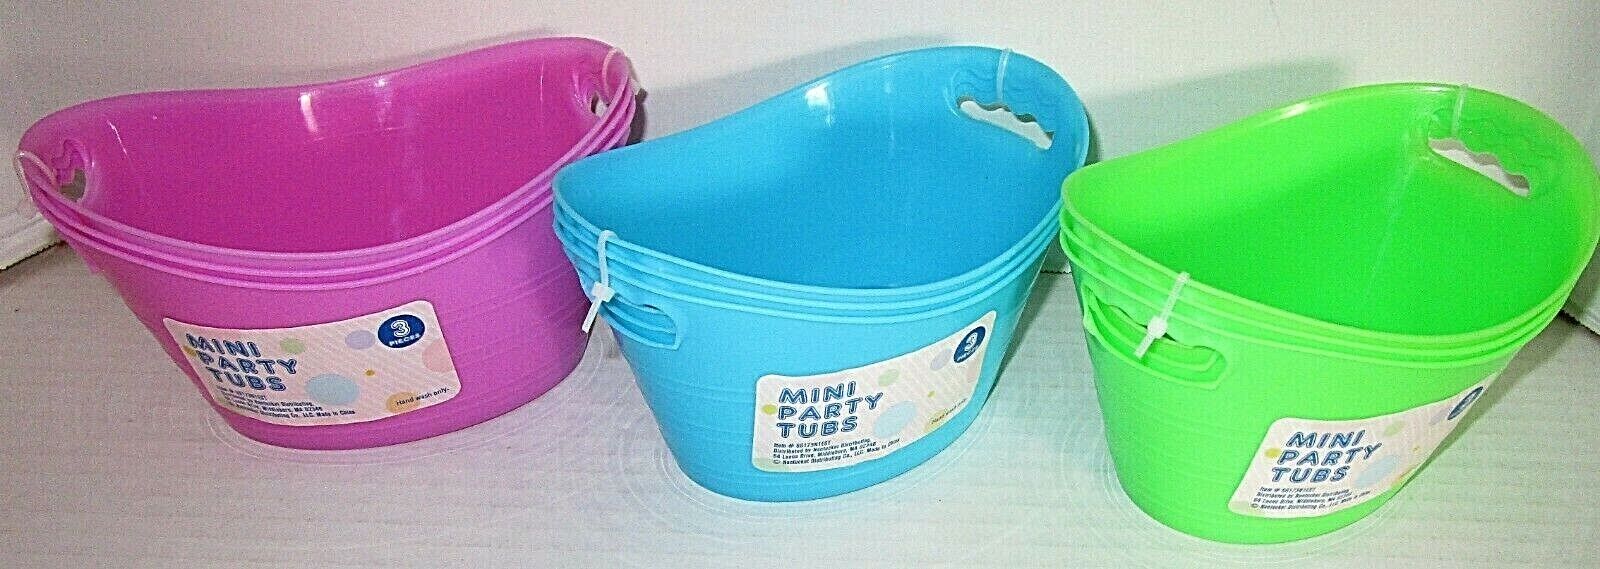 Mini Party Tub Assortment  Assorted Spring Colors Available 3 Pk. [your Choice]